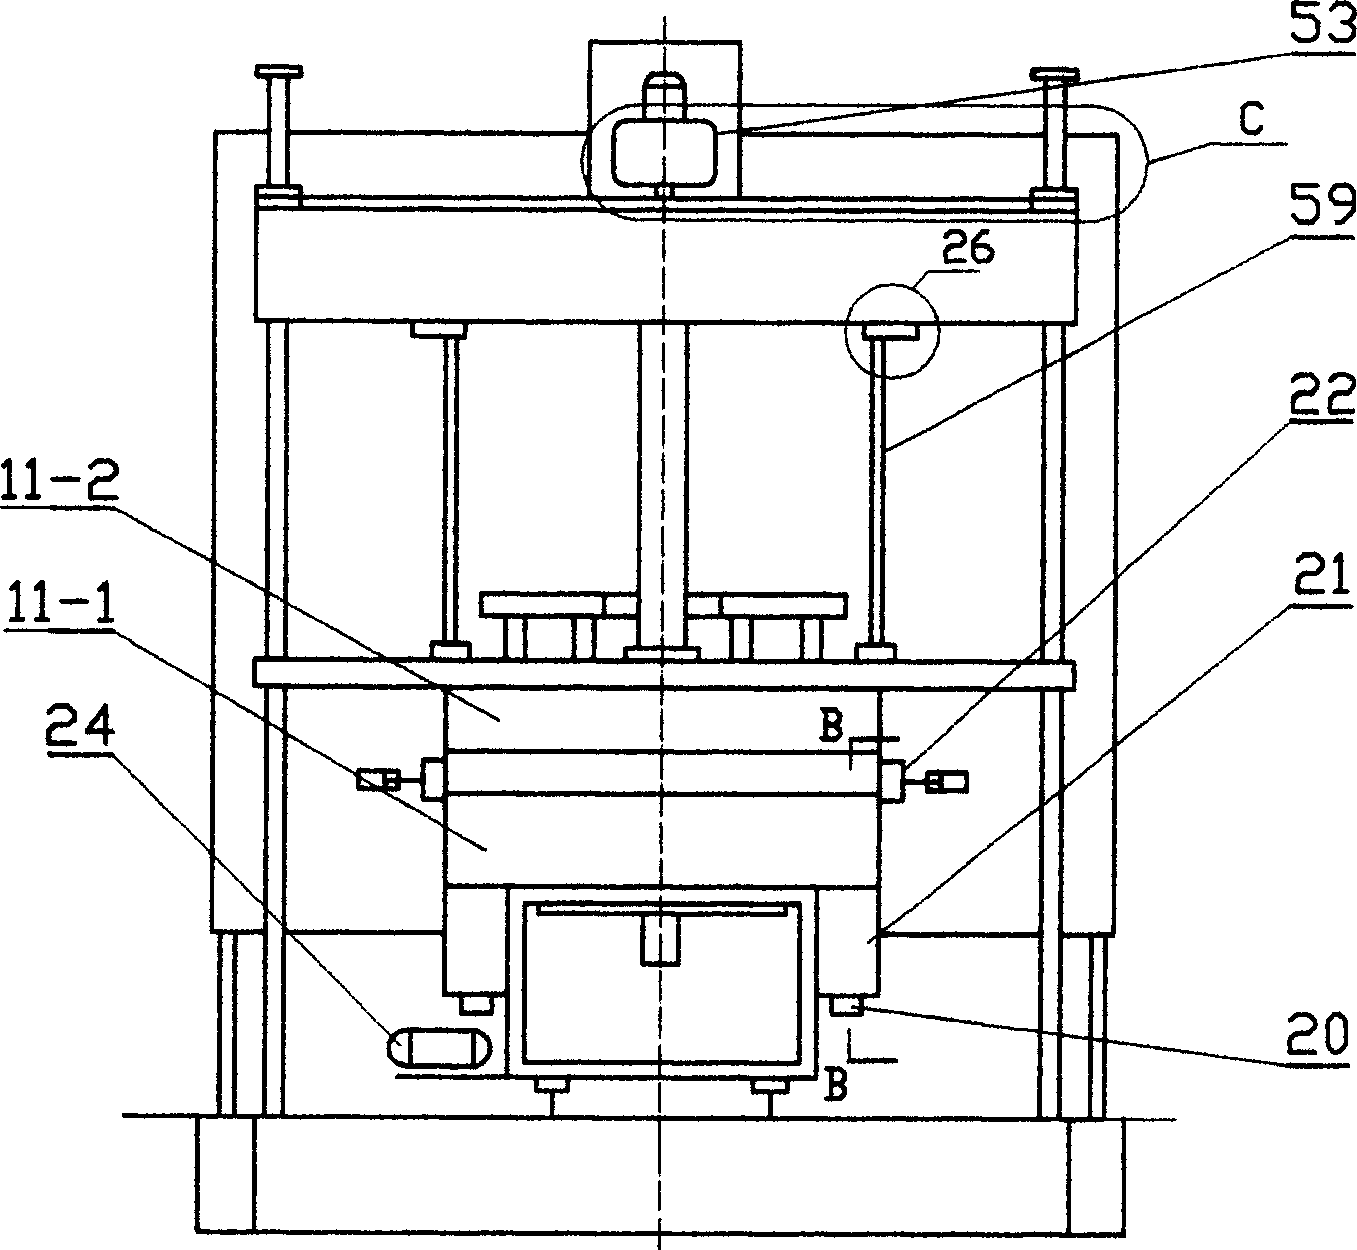 Super large-scale plastic injection moulding process and apparatus